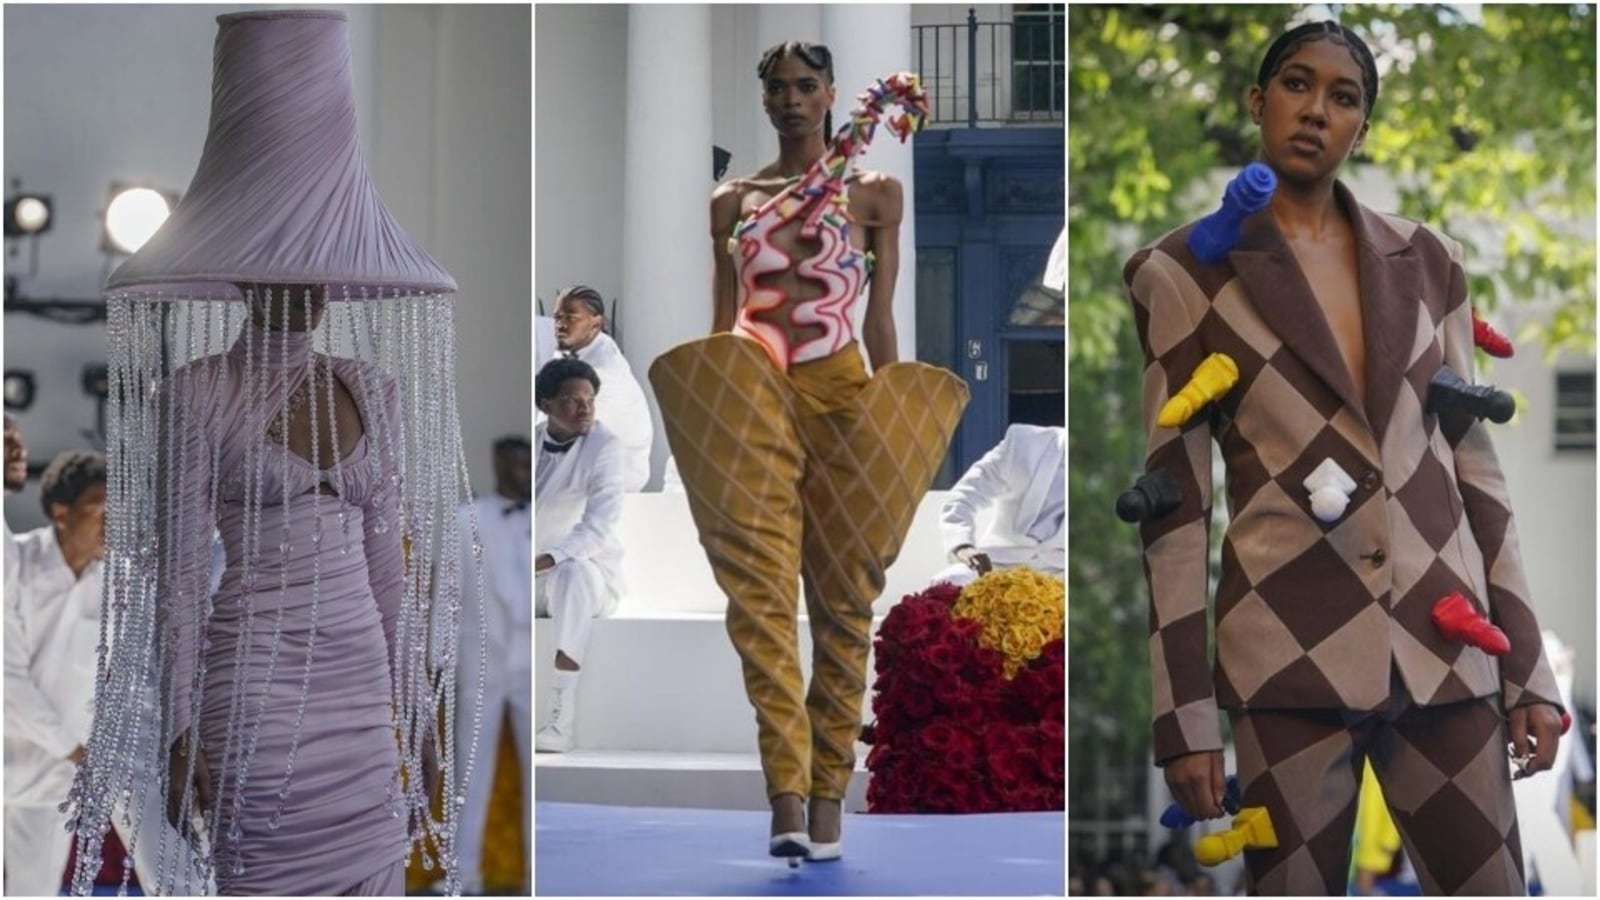 Pyer Moss's couture show pays tribute to Black inventors overlooked by ...